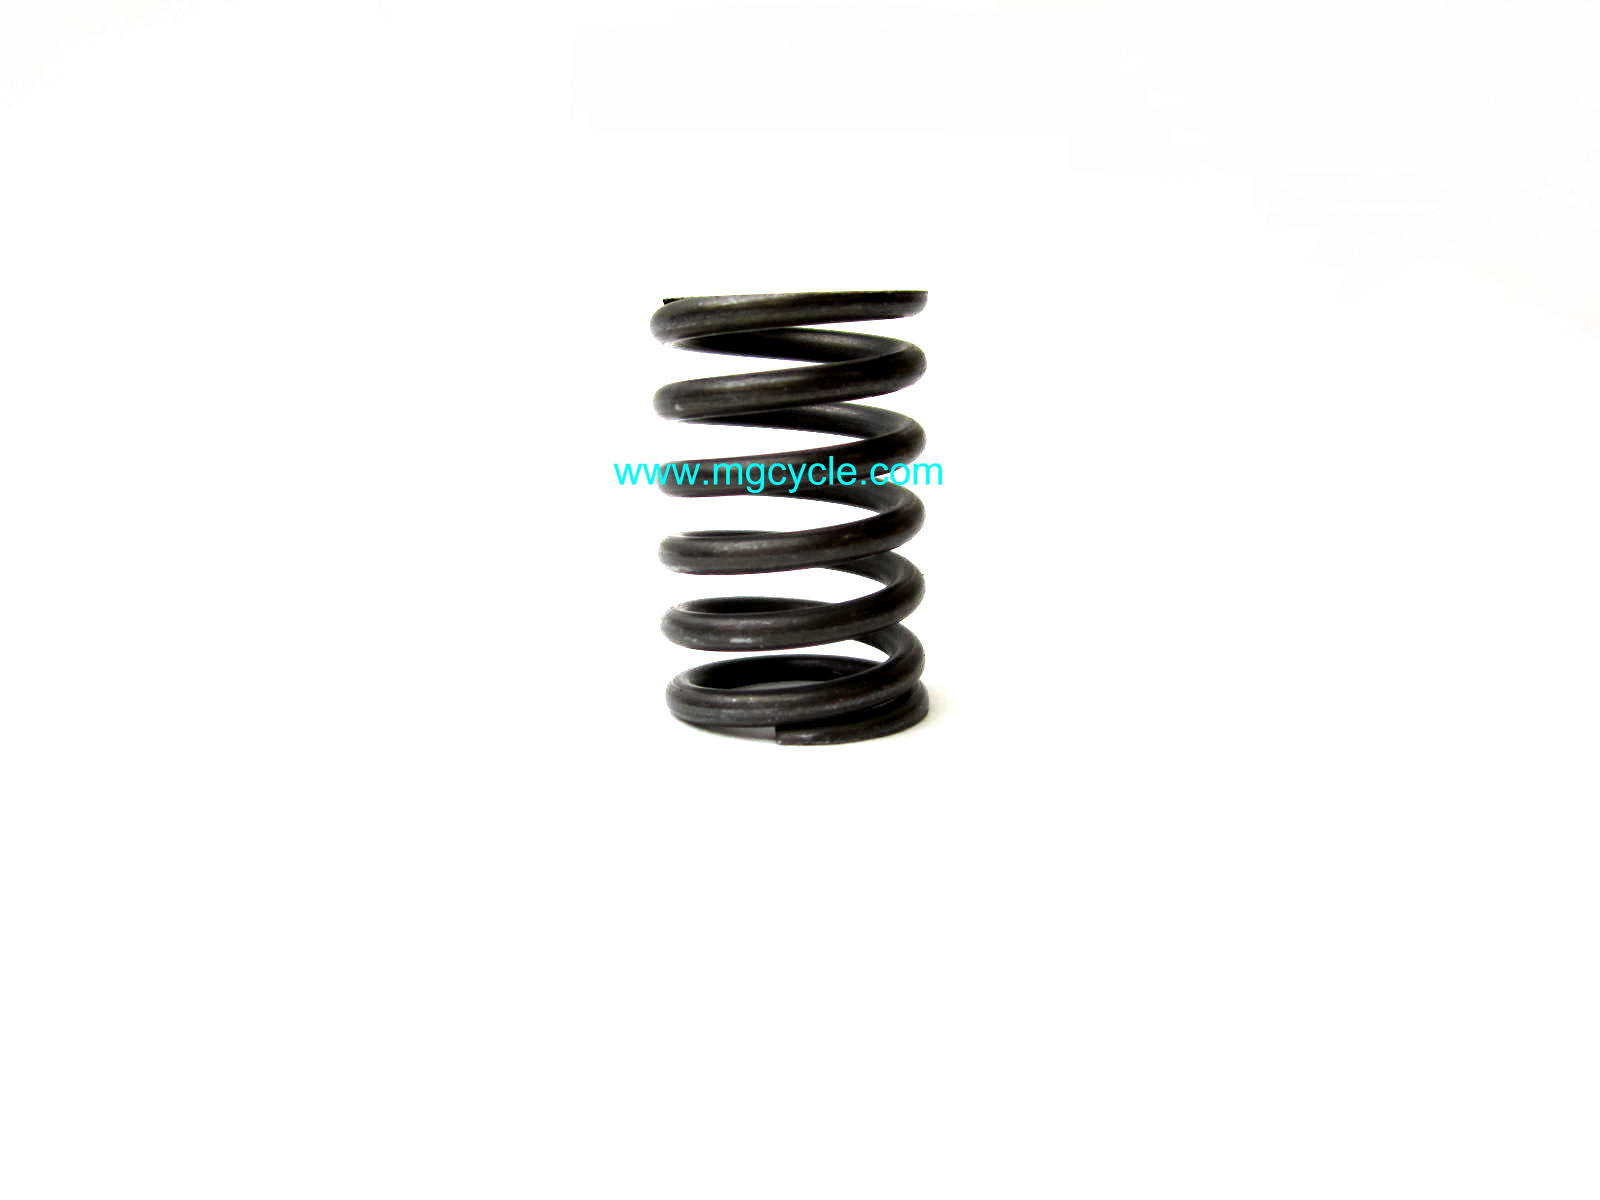 Soft clutch spring for late model 10 spring clutches GU04084100